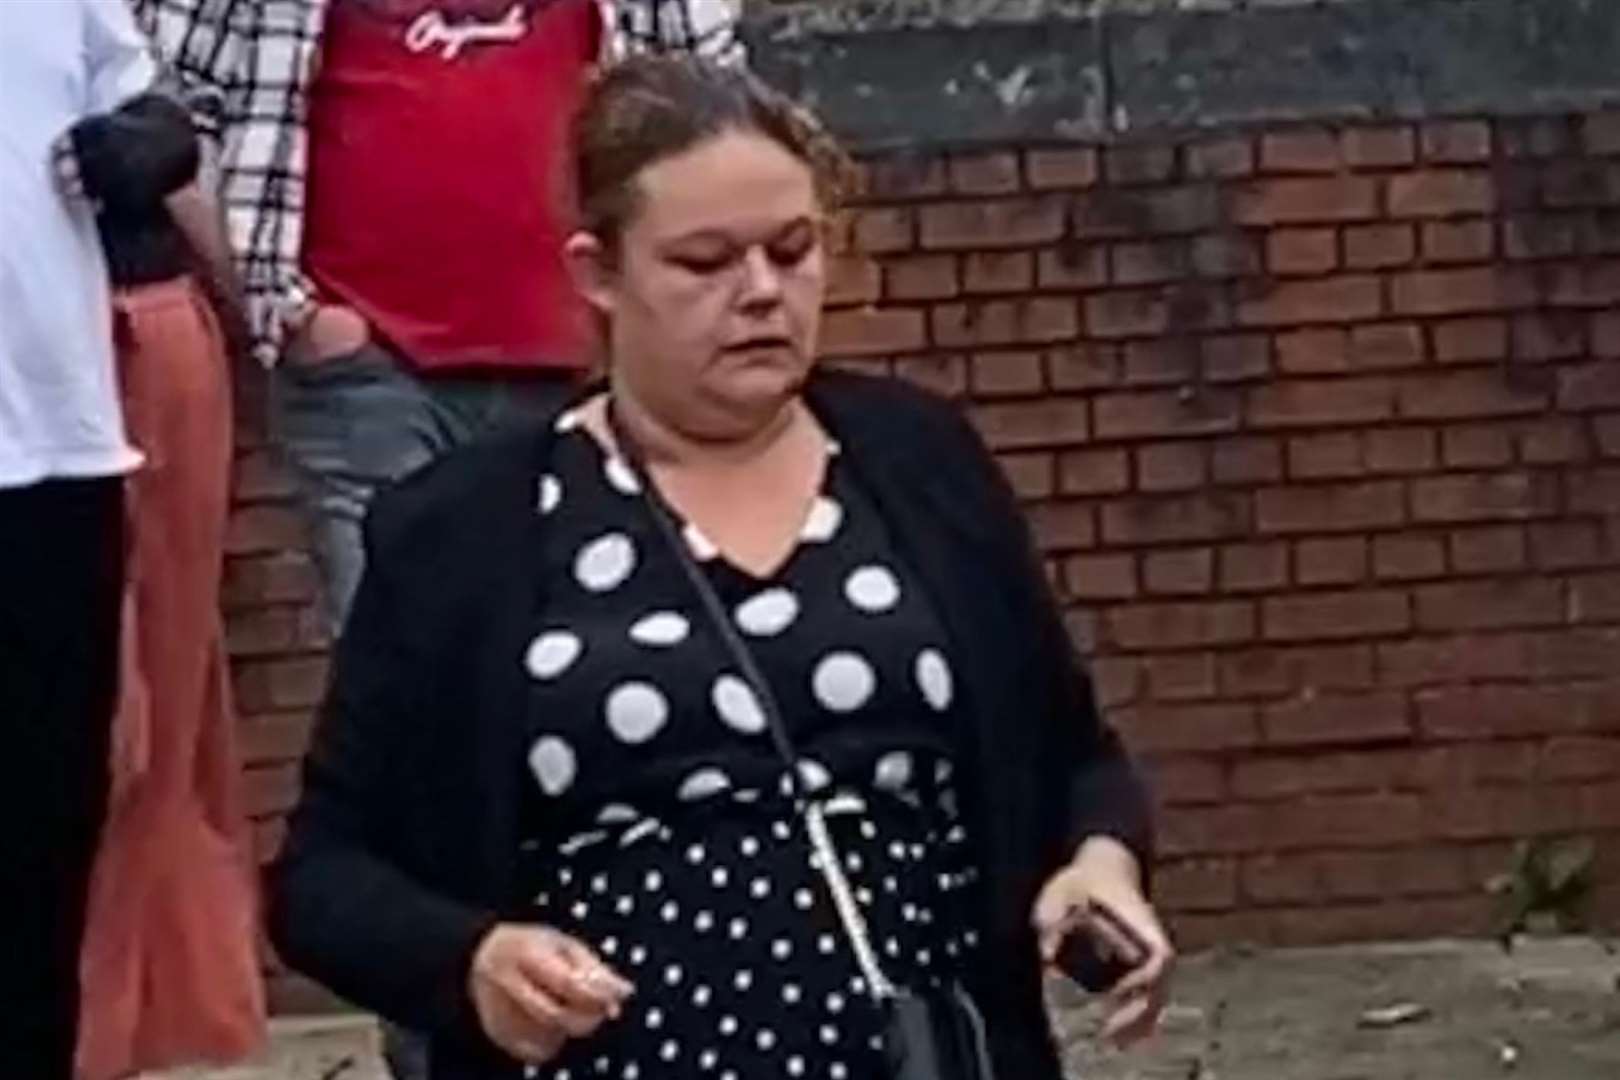 Laura Hancock, from Ramsgate, stole thousands of pounds from vulnerable adults